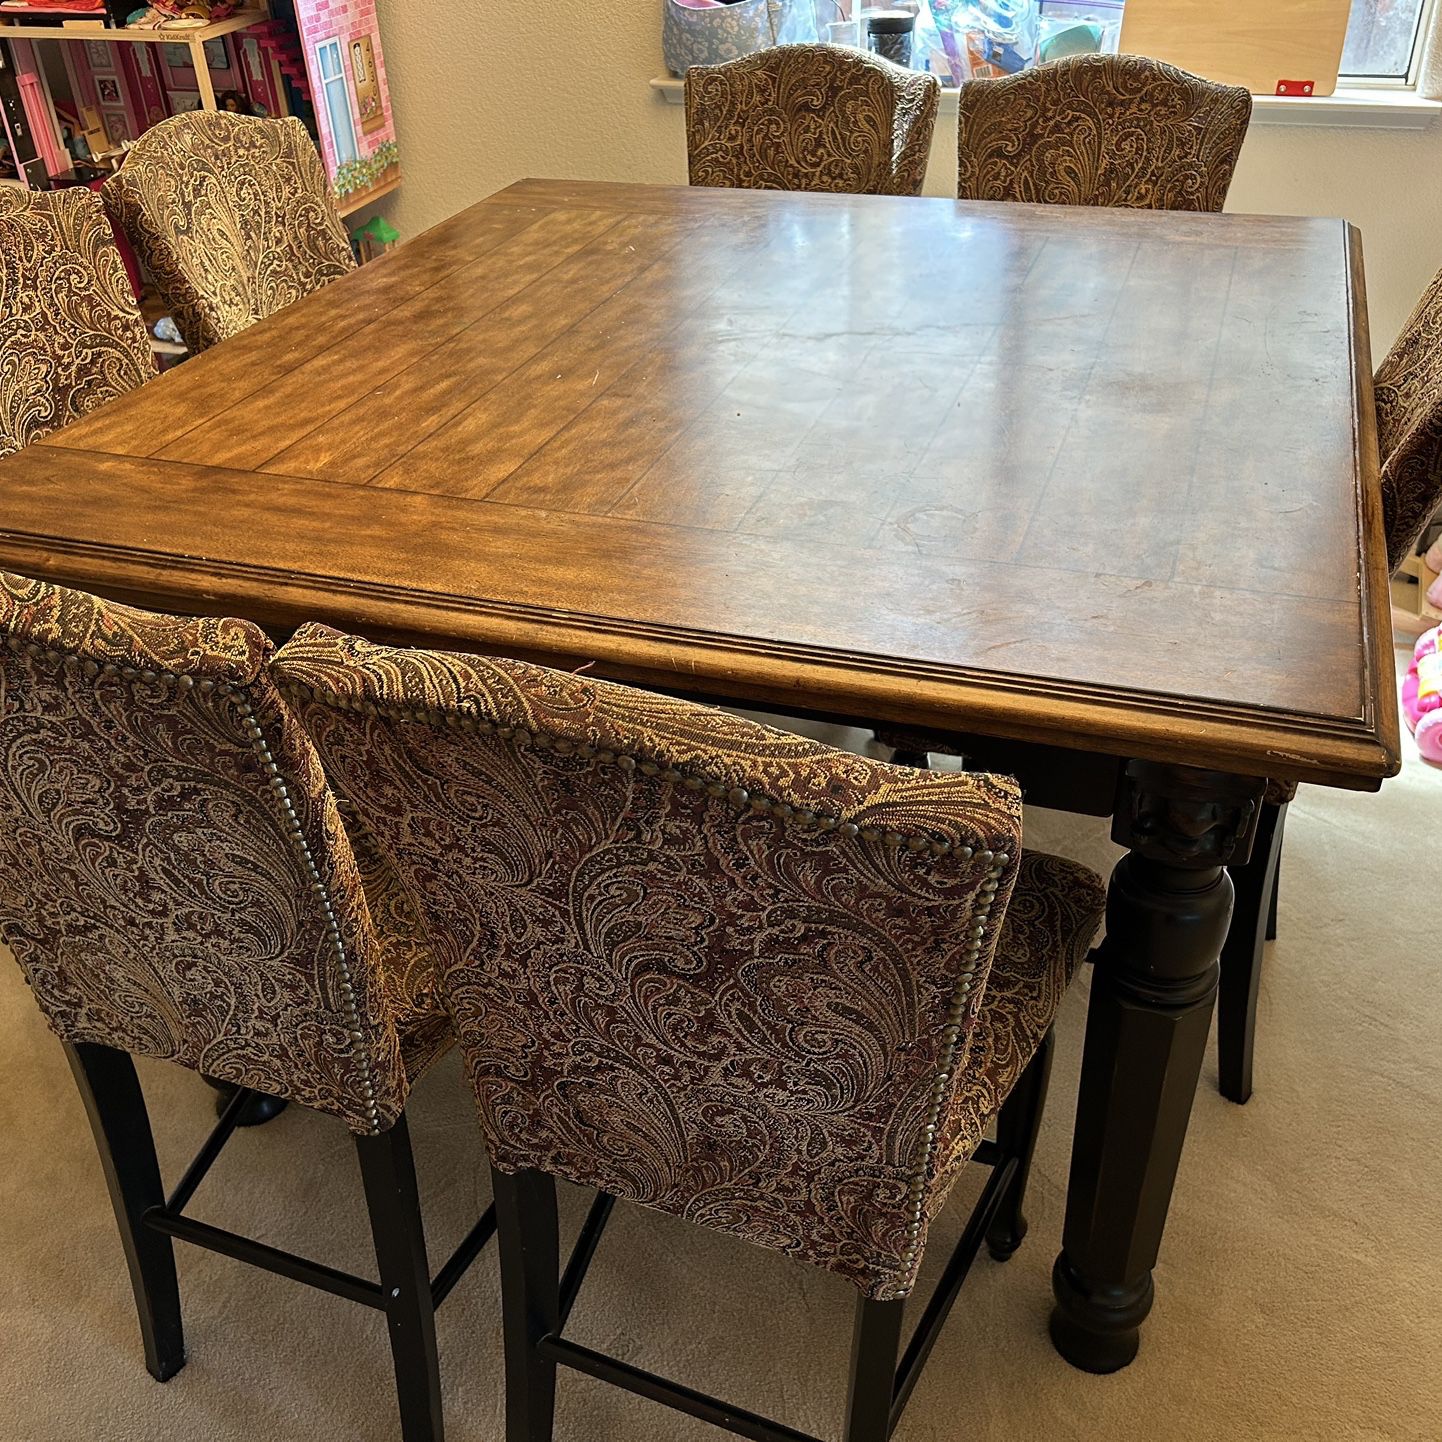 Gorgeous Wood Table And 7 Matching Chairs! 